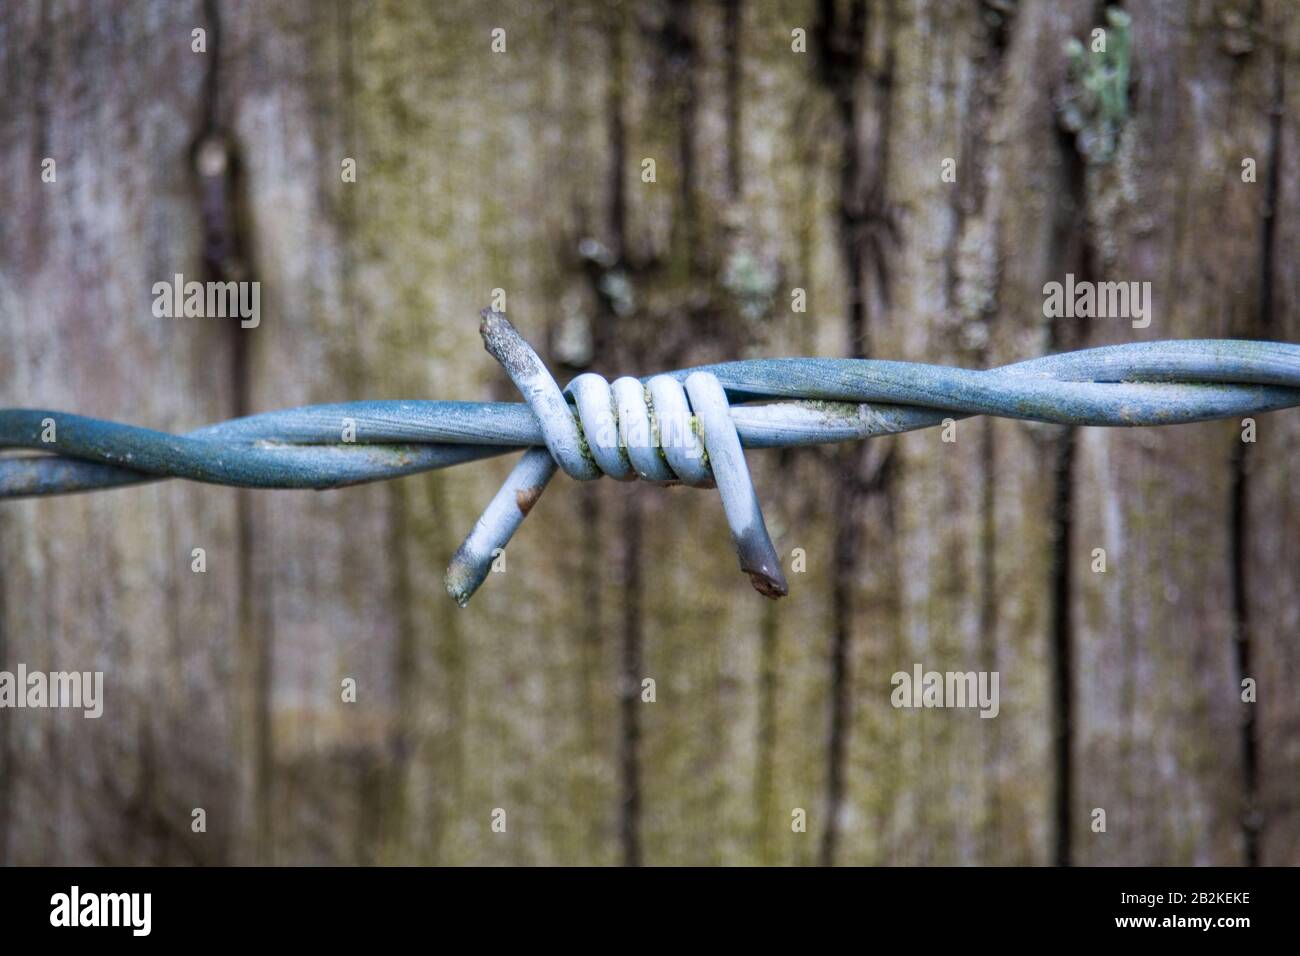 close-up of a piece of barbed wire in the foreground with old wood in the background Stock Photo